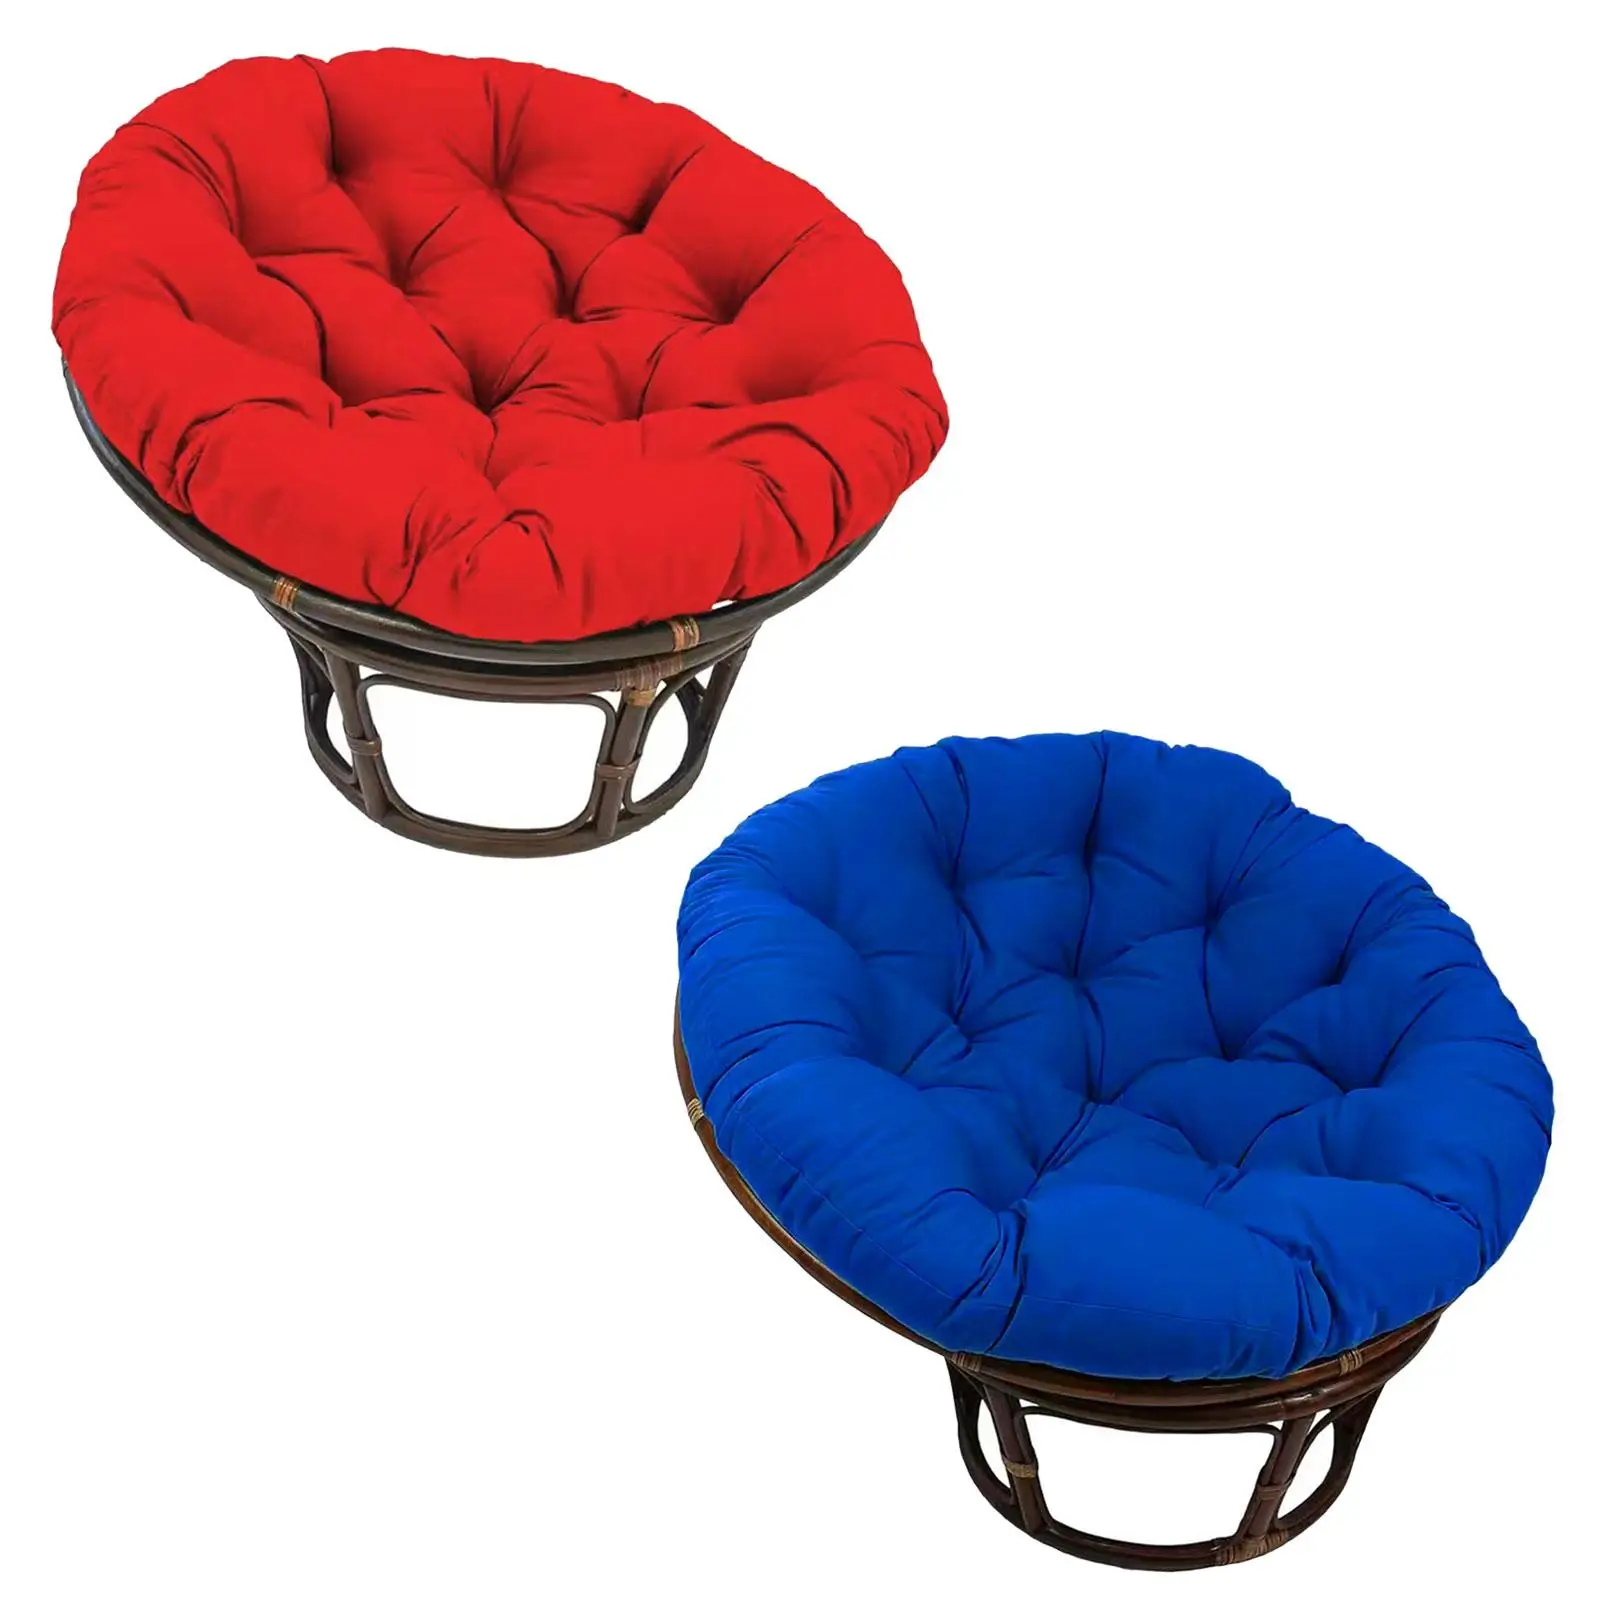 Thickened Overstuffed Round Cushion,Egg Swing Chair Cushion for Hanging Beds, Egg Chair 60cmx60cm